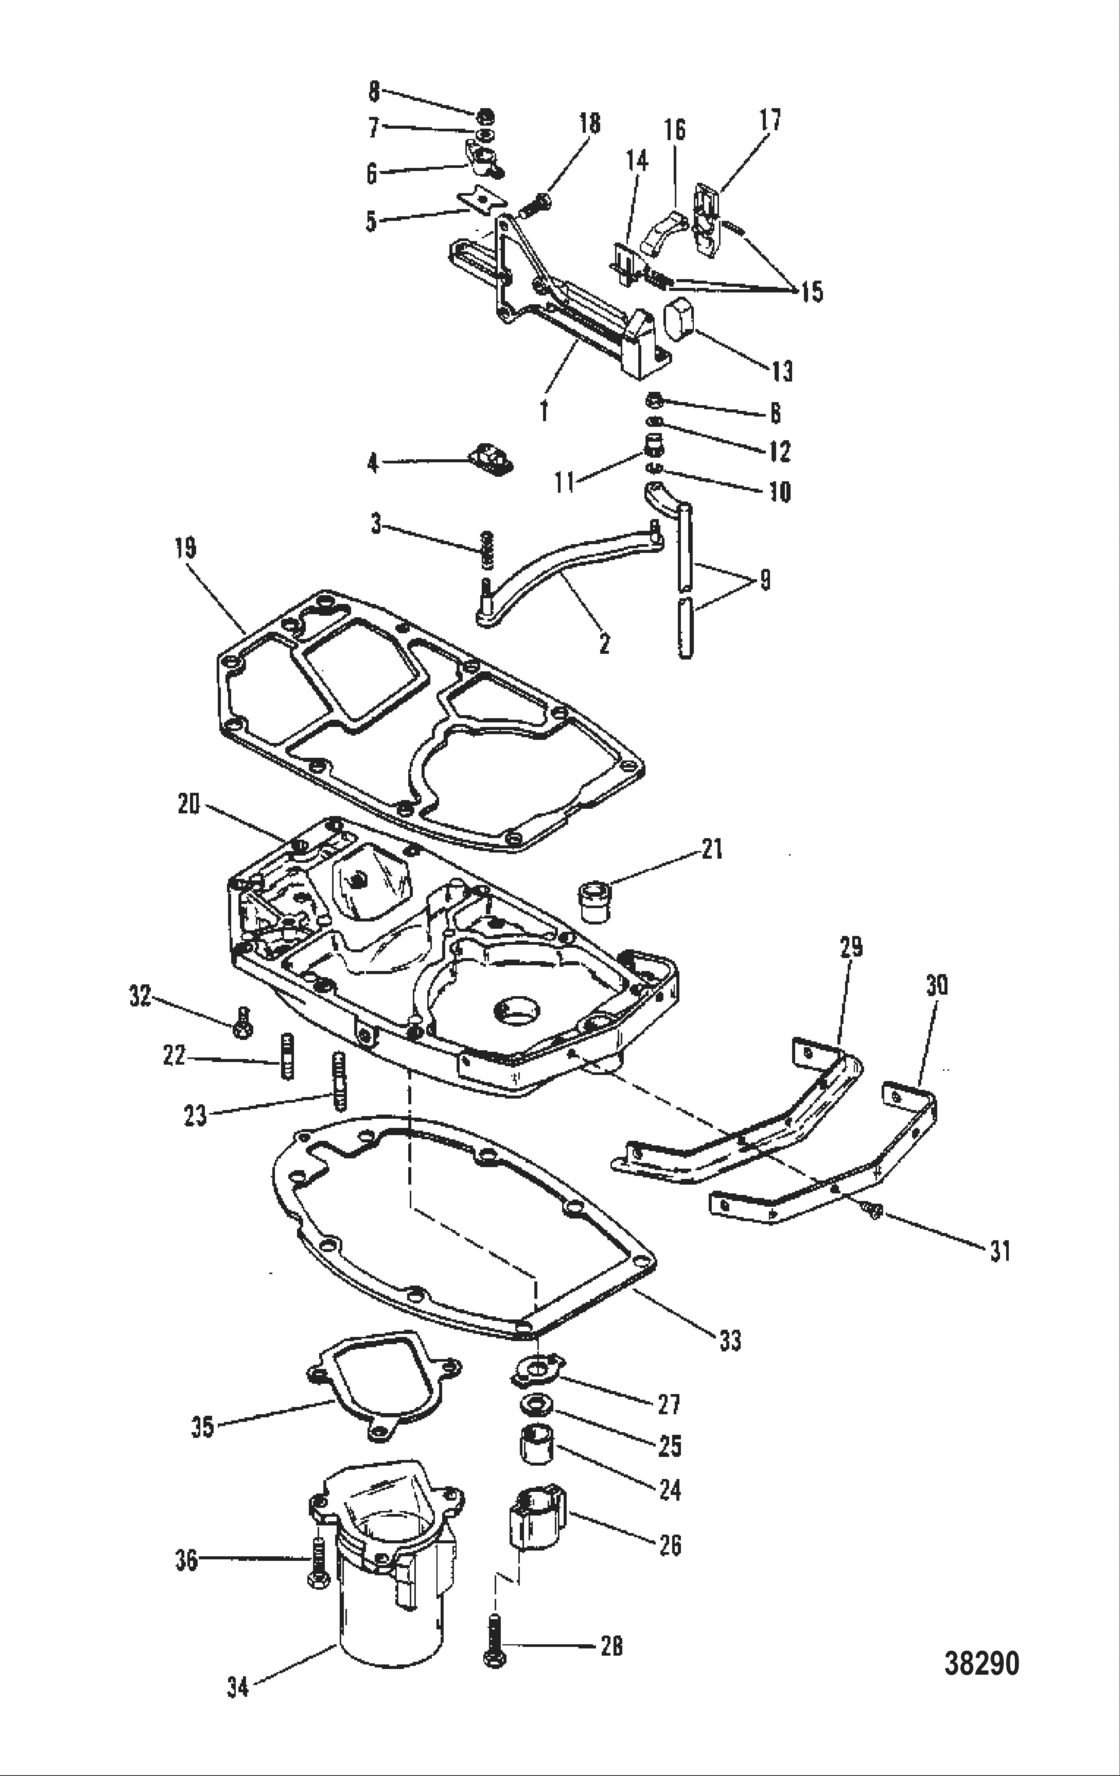 Shift Linkage And Exhaust Plate